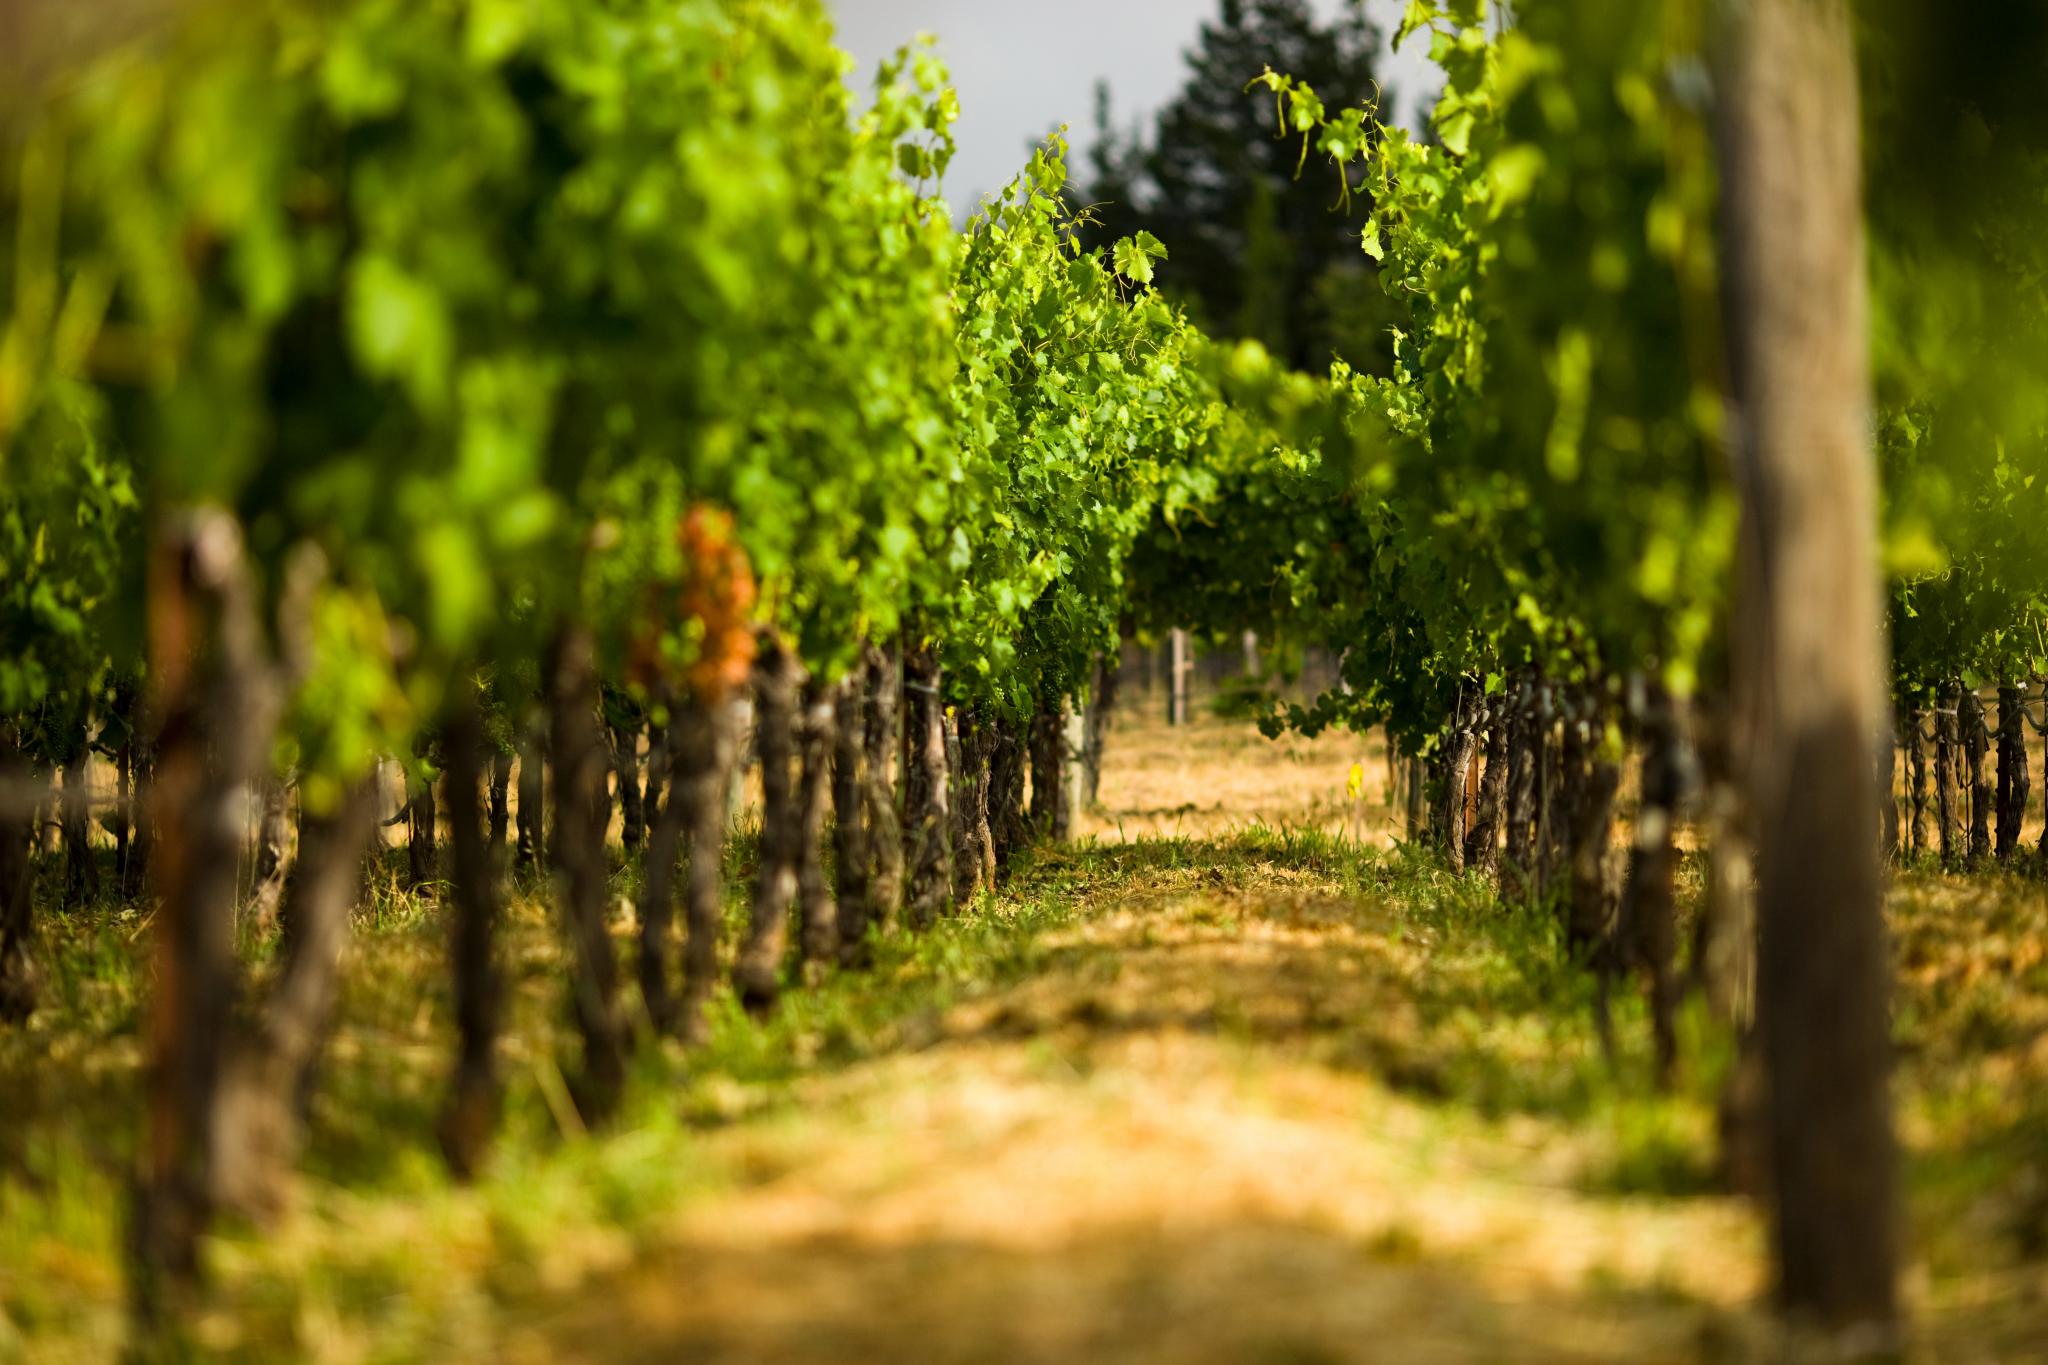 Looking down a vineyard row with grape vines on the left and right.